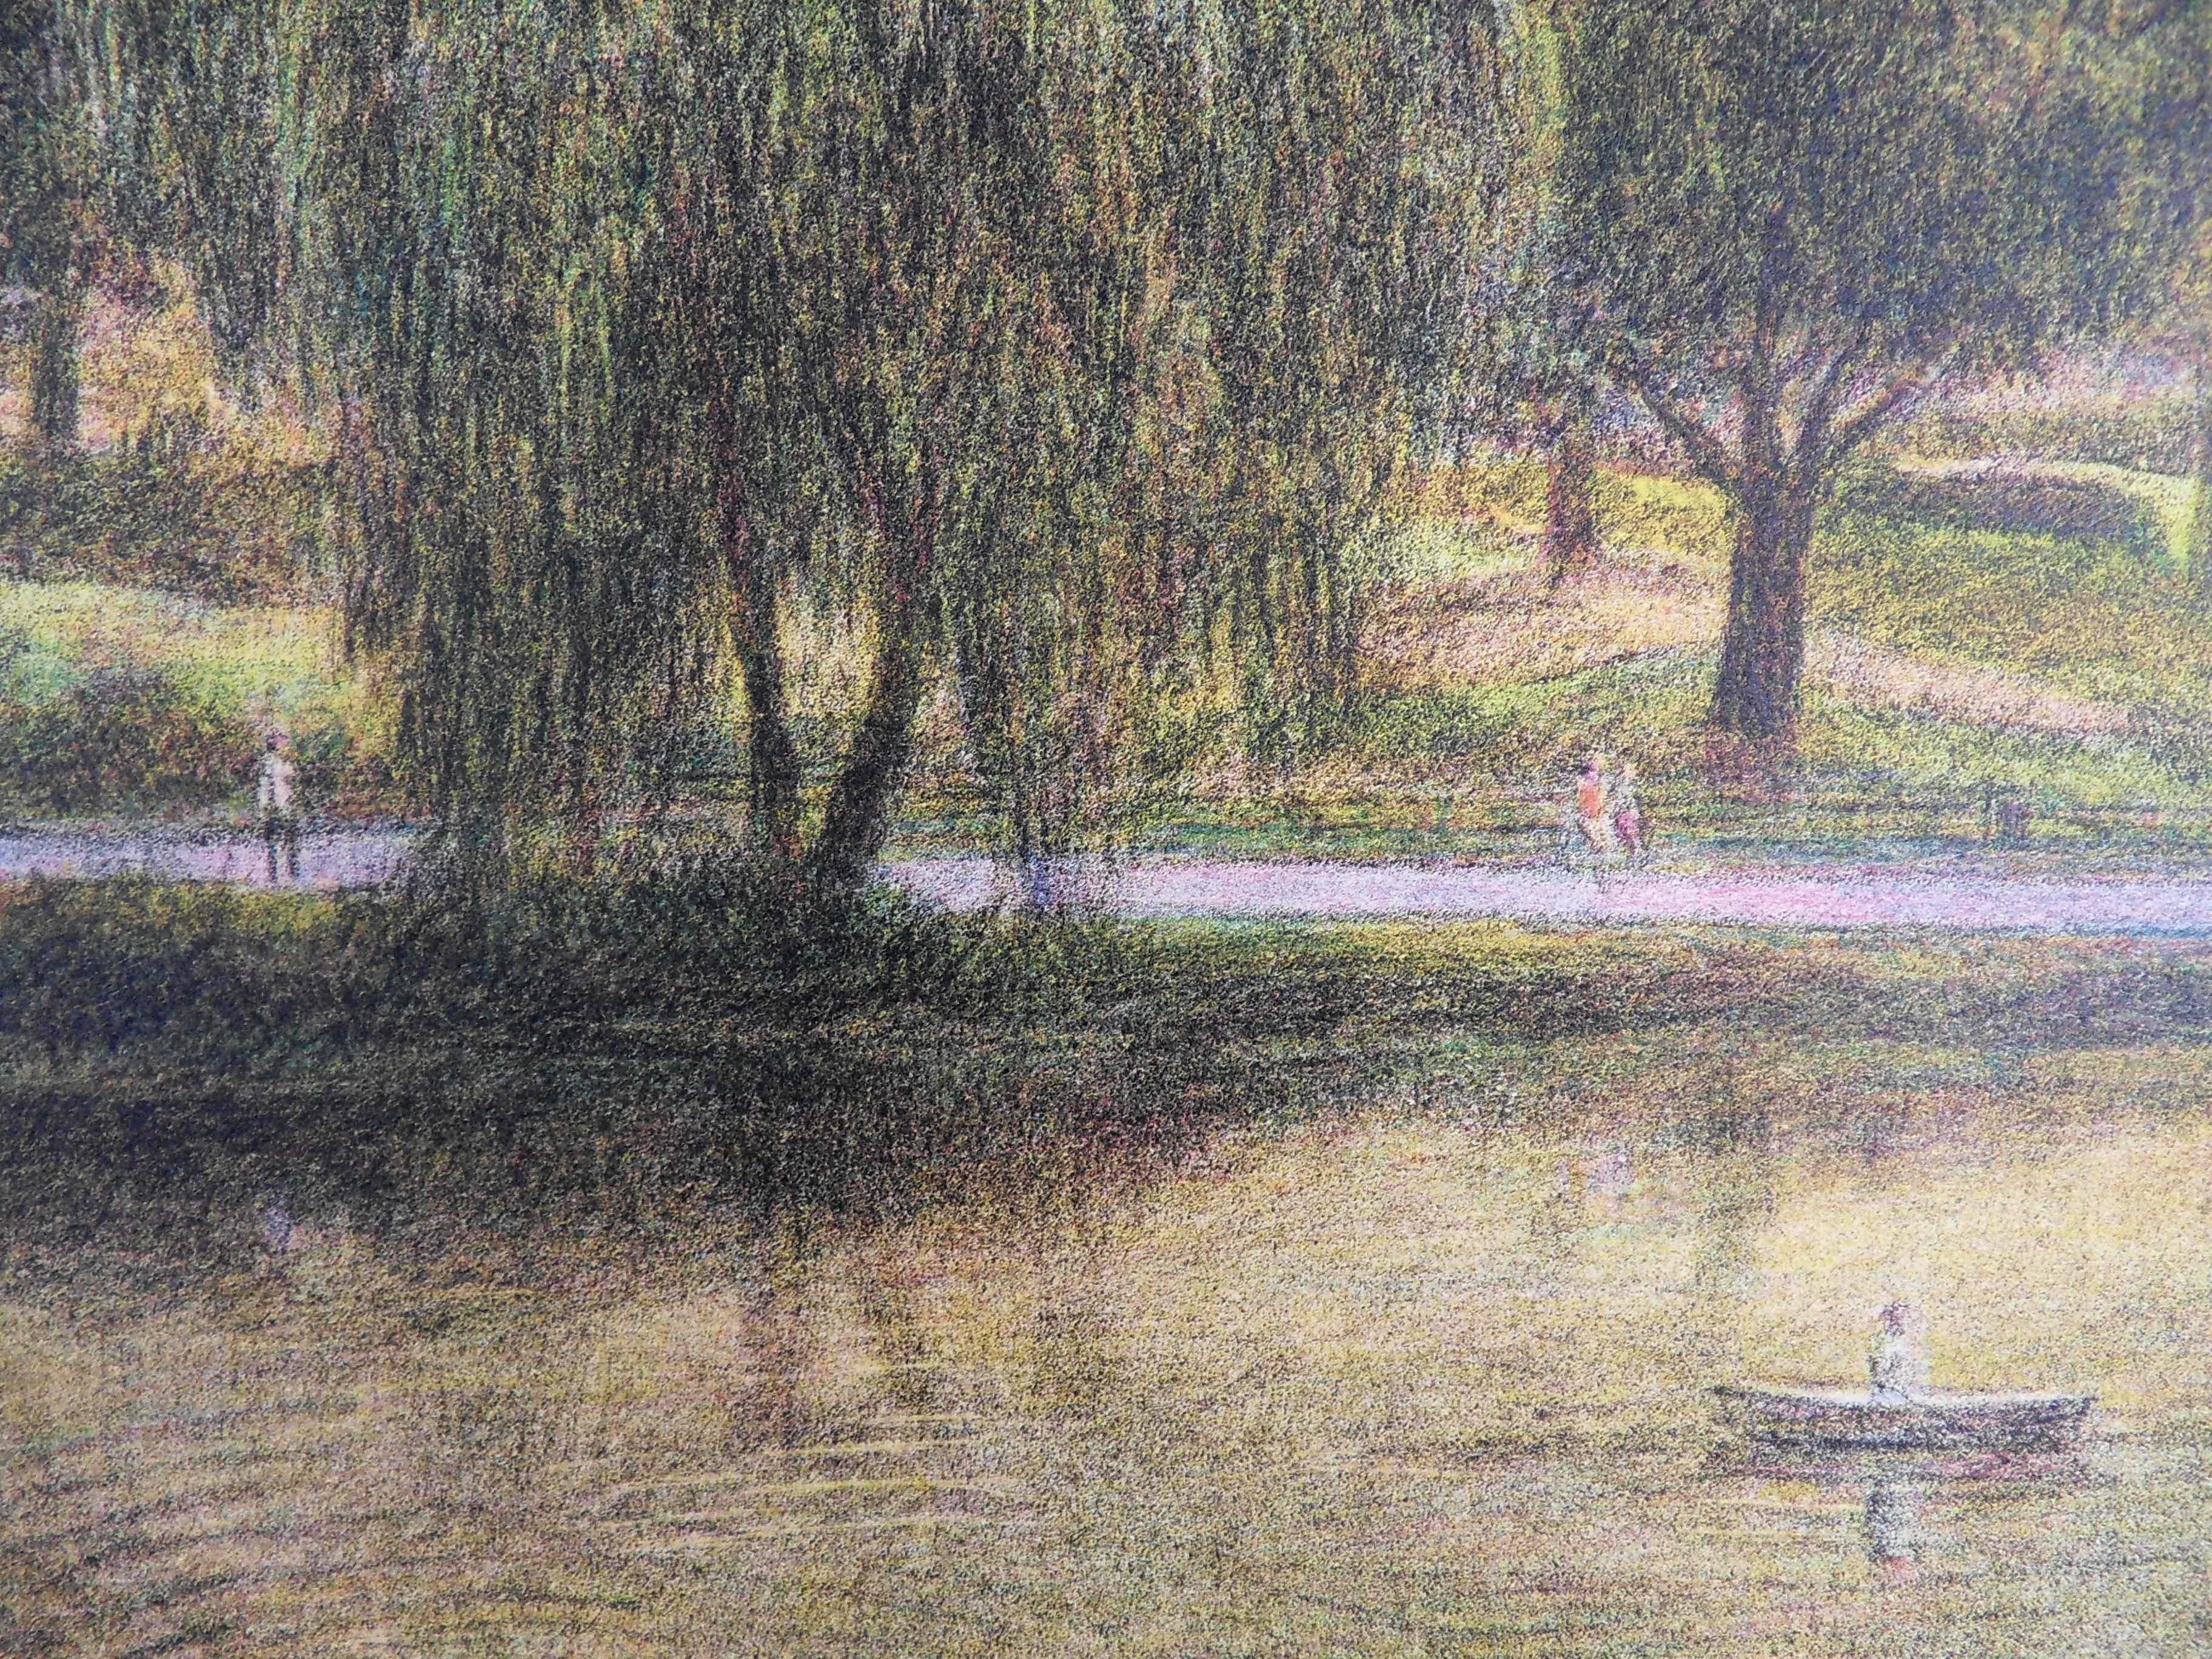 New York : The Lake in Central Park - Original handsigned lithograph - American Impressionist Print by Harold Altman